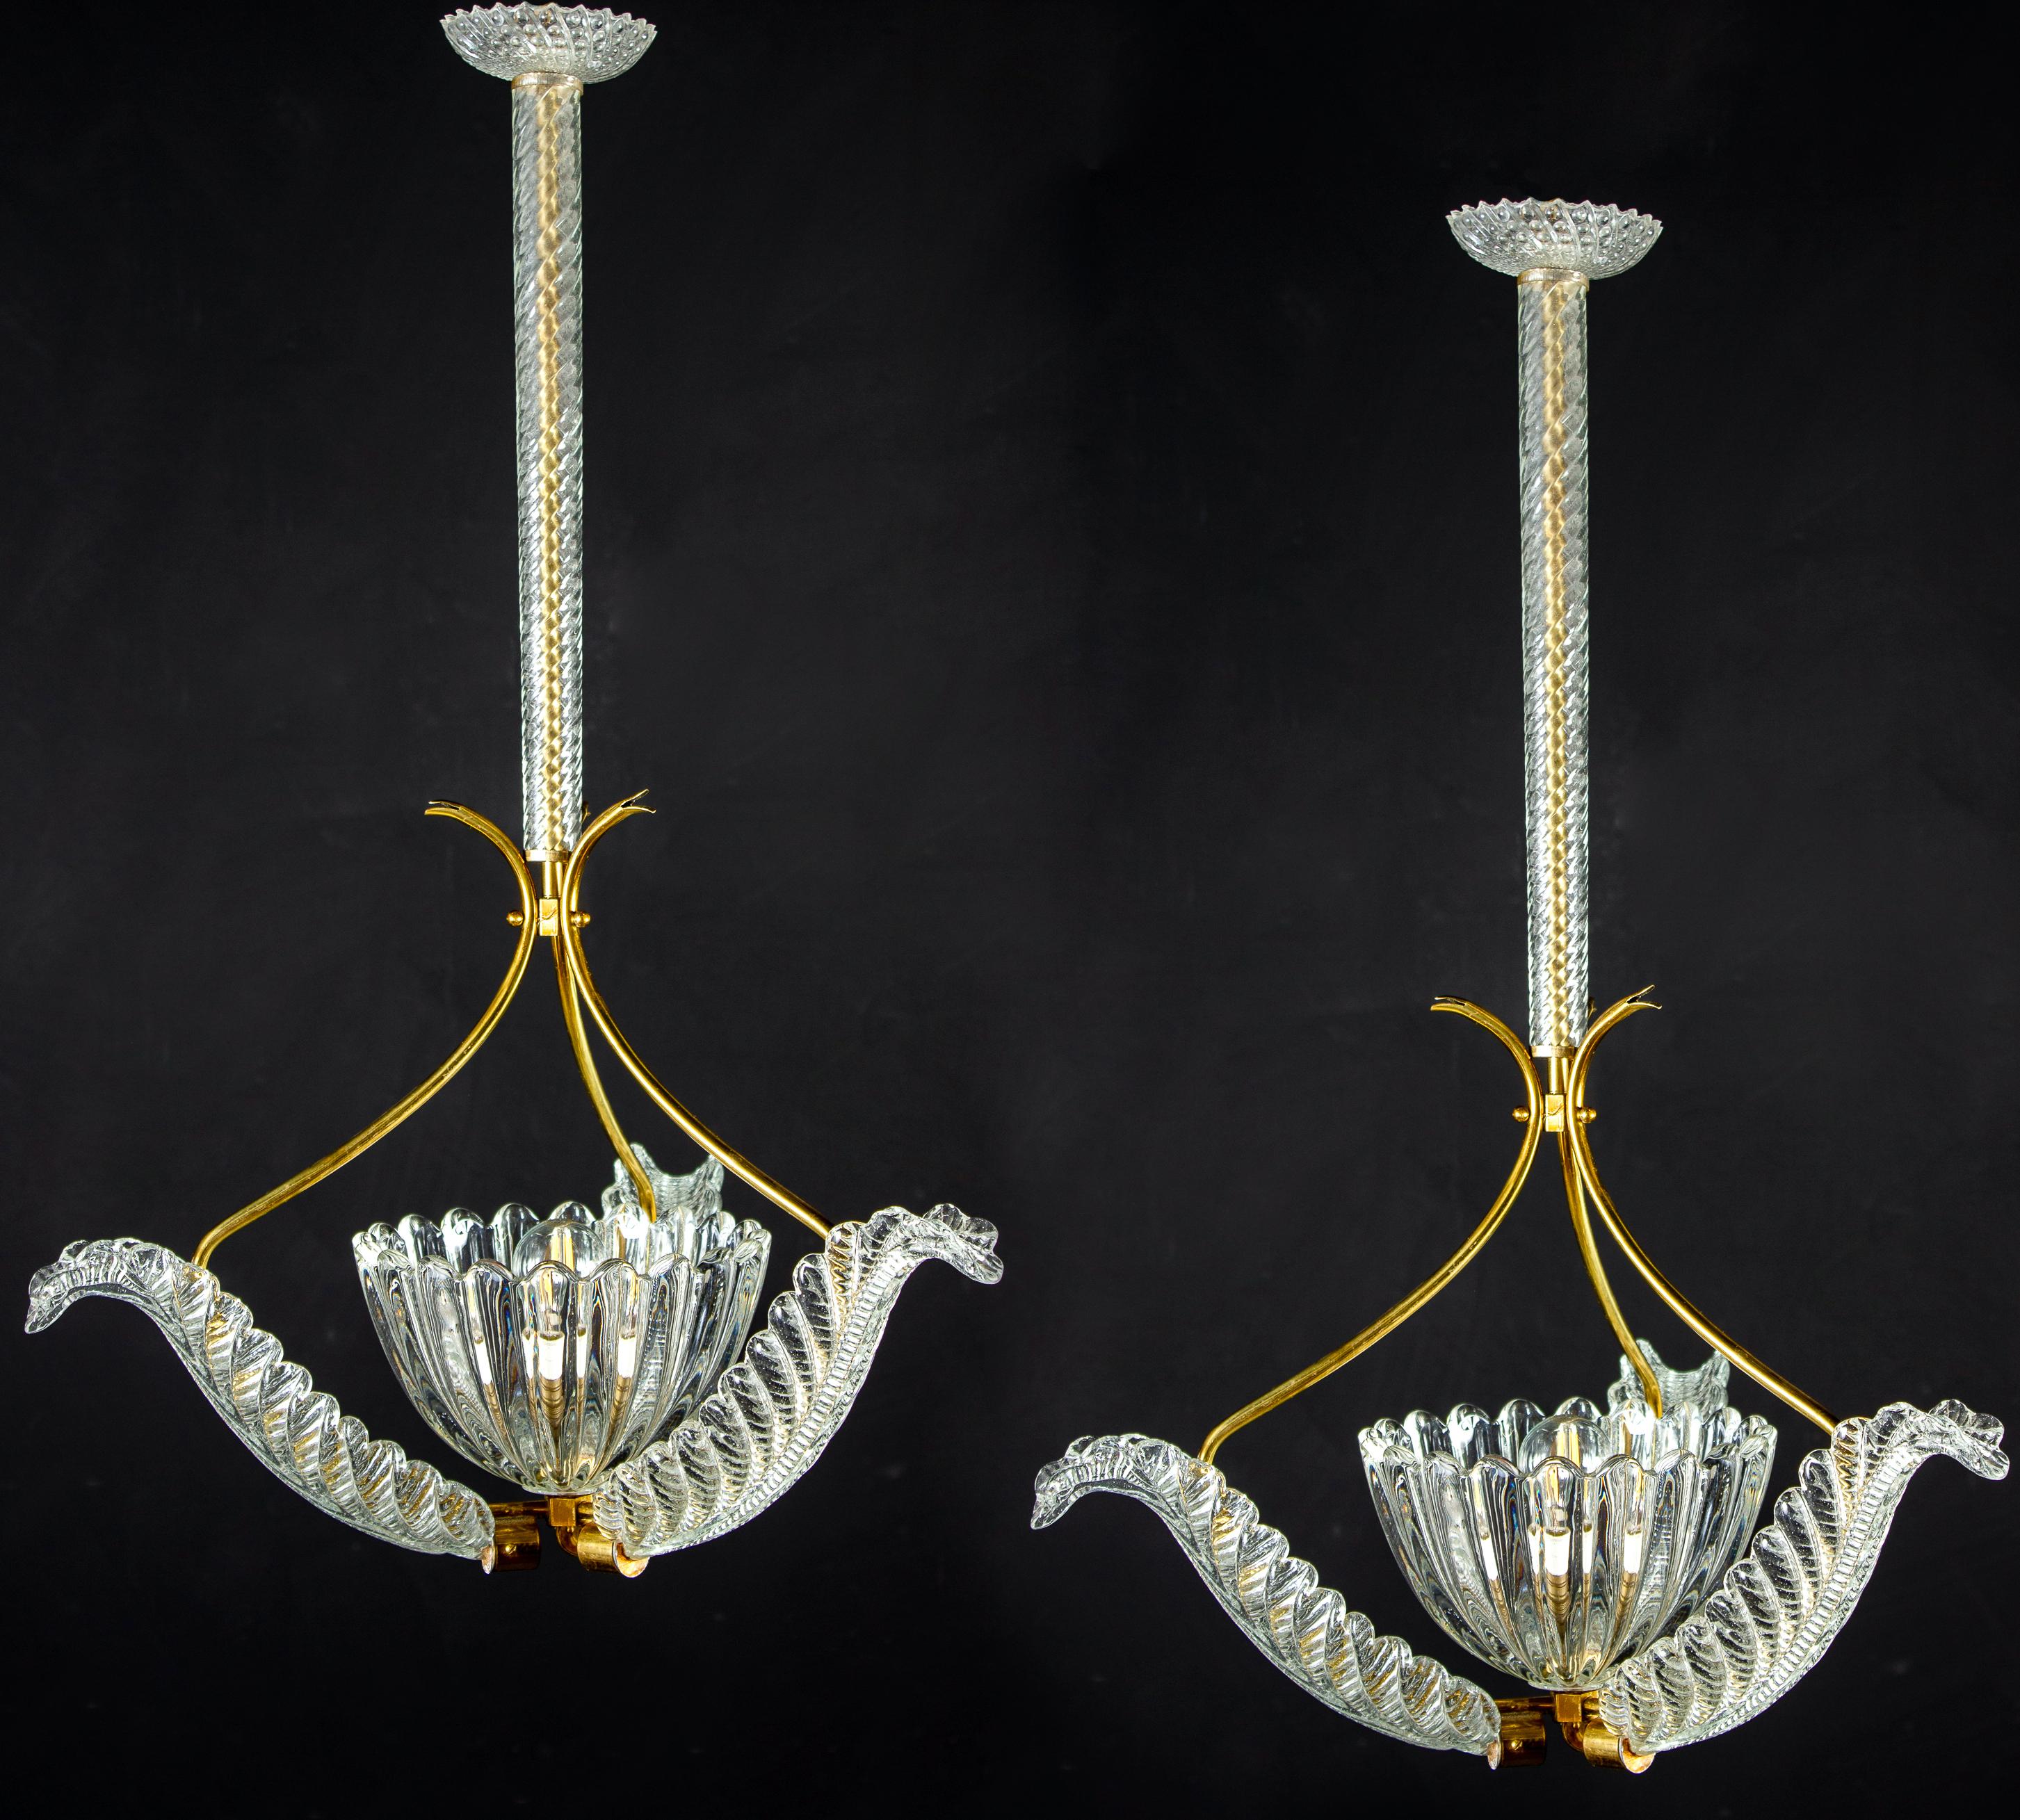 Art Deco Pair of Liberty Pendants or Lanterns by Ercole Barovier, 1940s For Sale